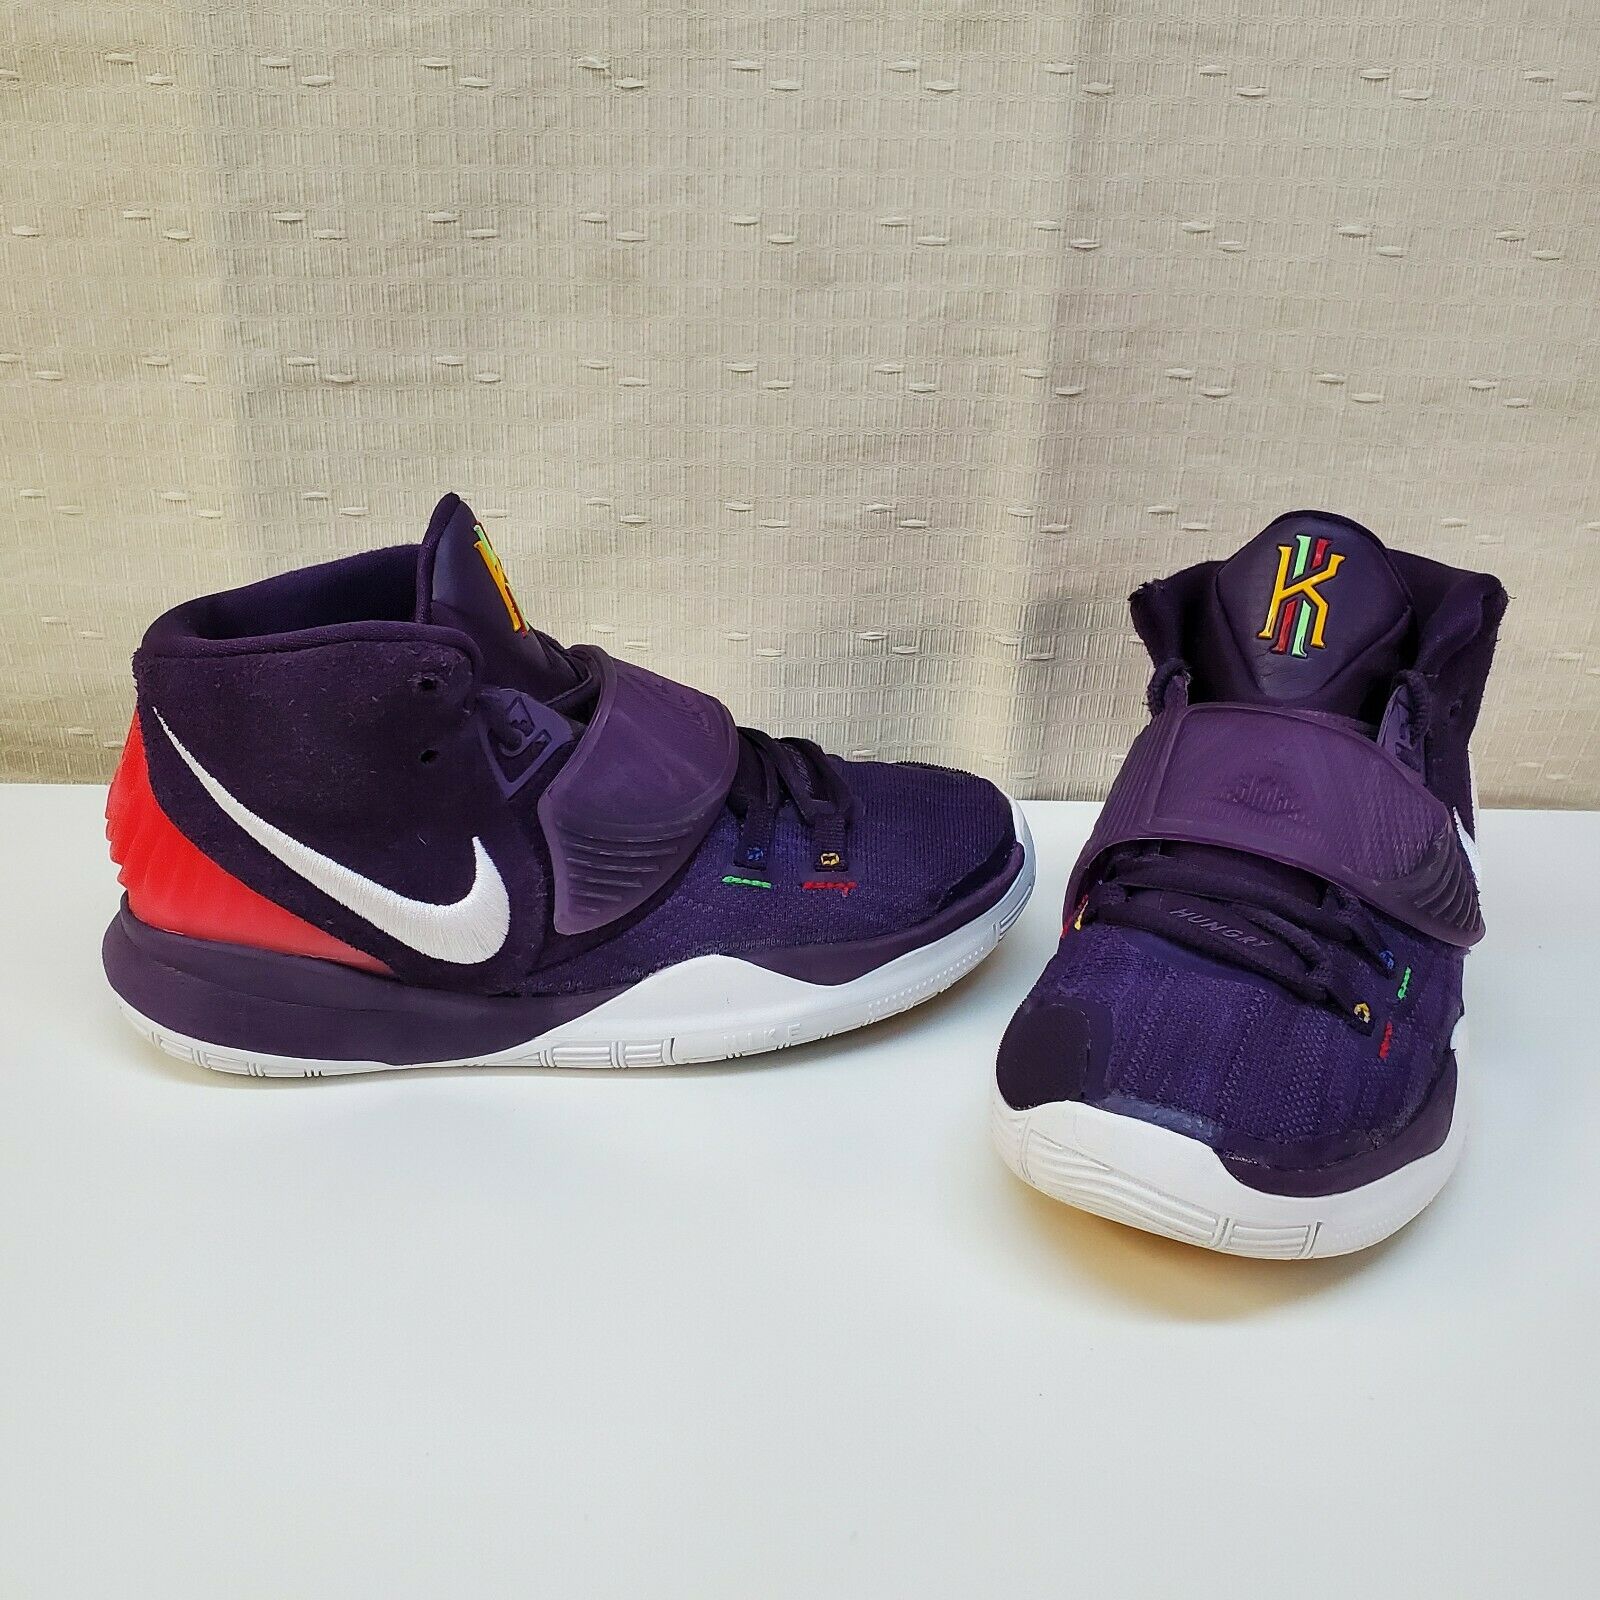 Nike Kyrie 6 Youth Basketball Shoes, Grand Purple. Size 4.5Y (BQ5599-500)